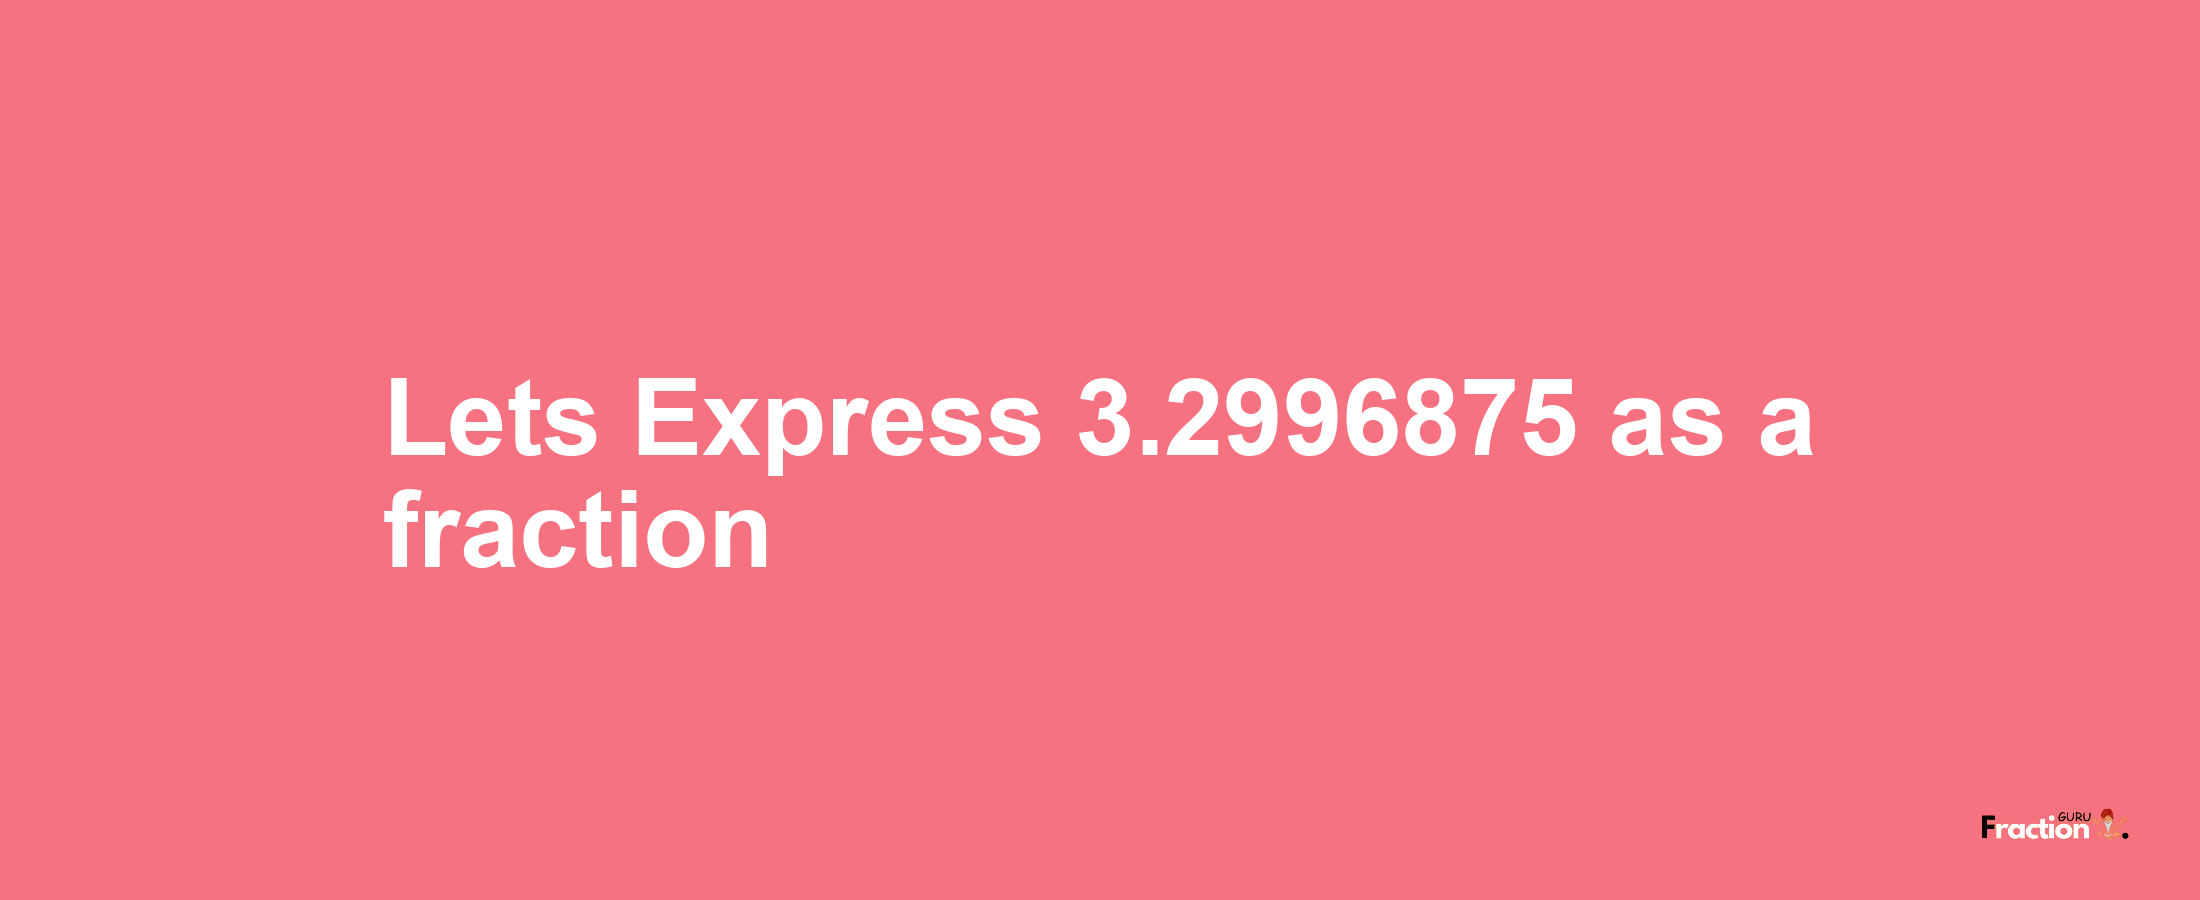 Lets Express 3.2996875 as afraction